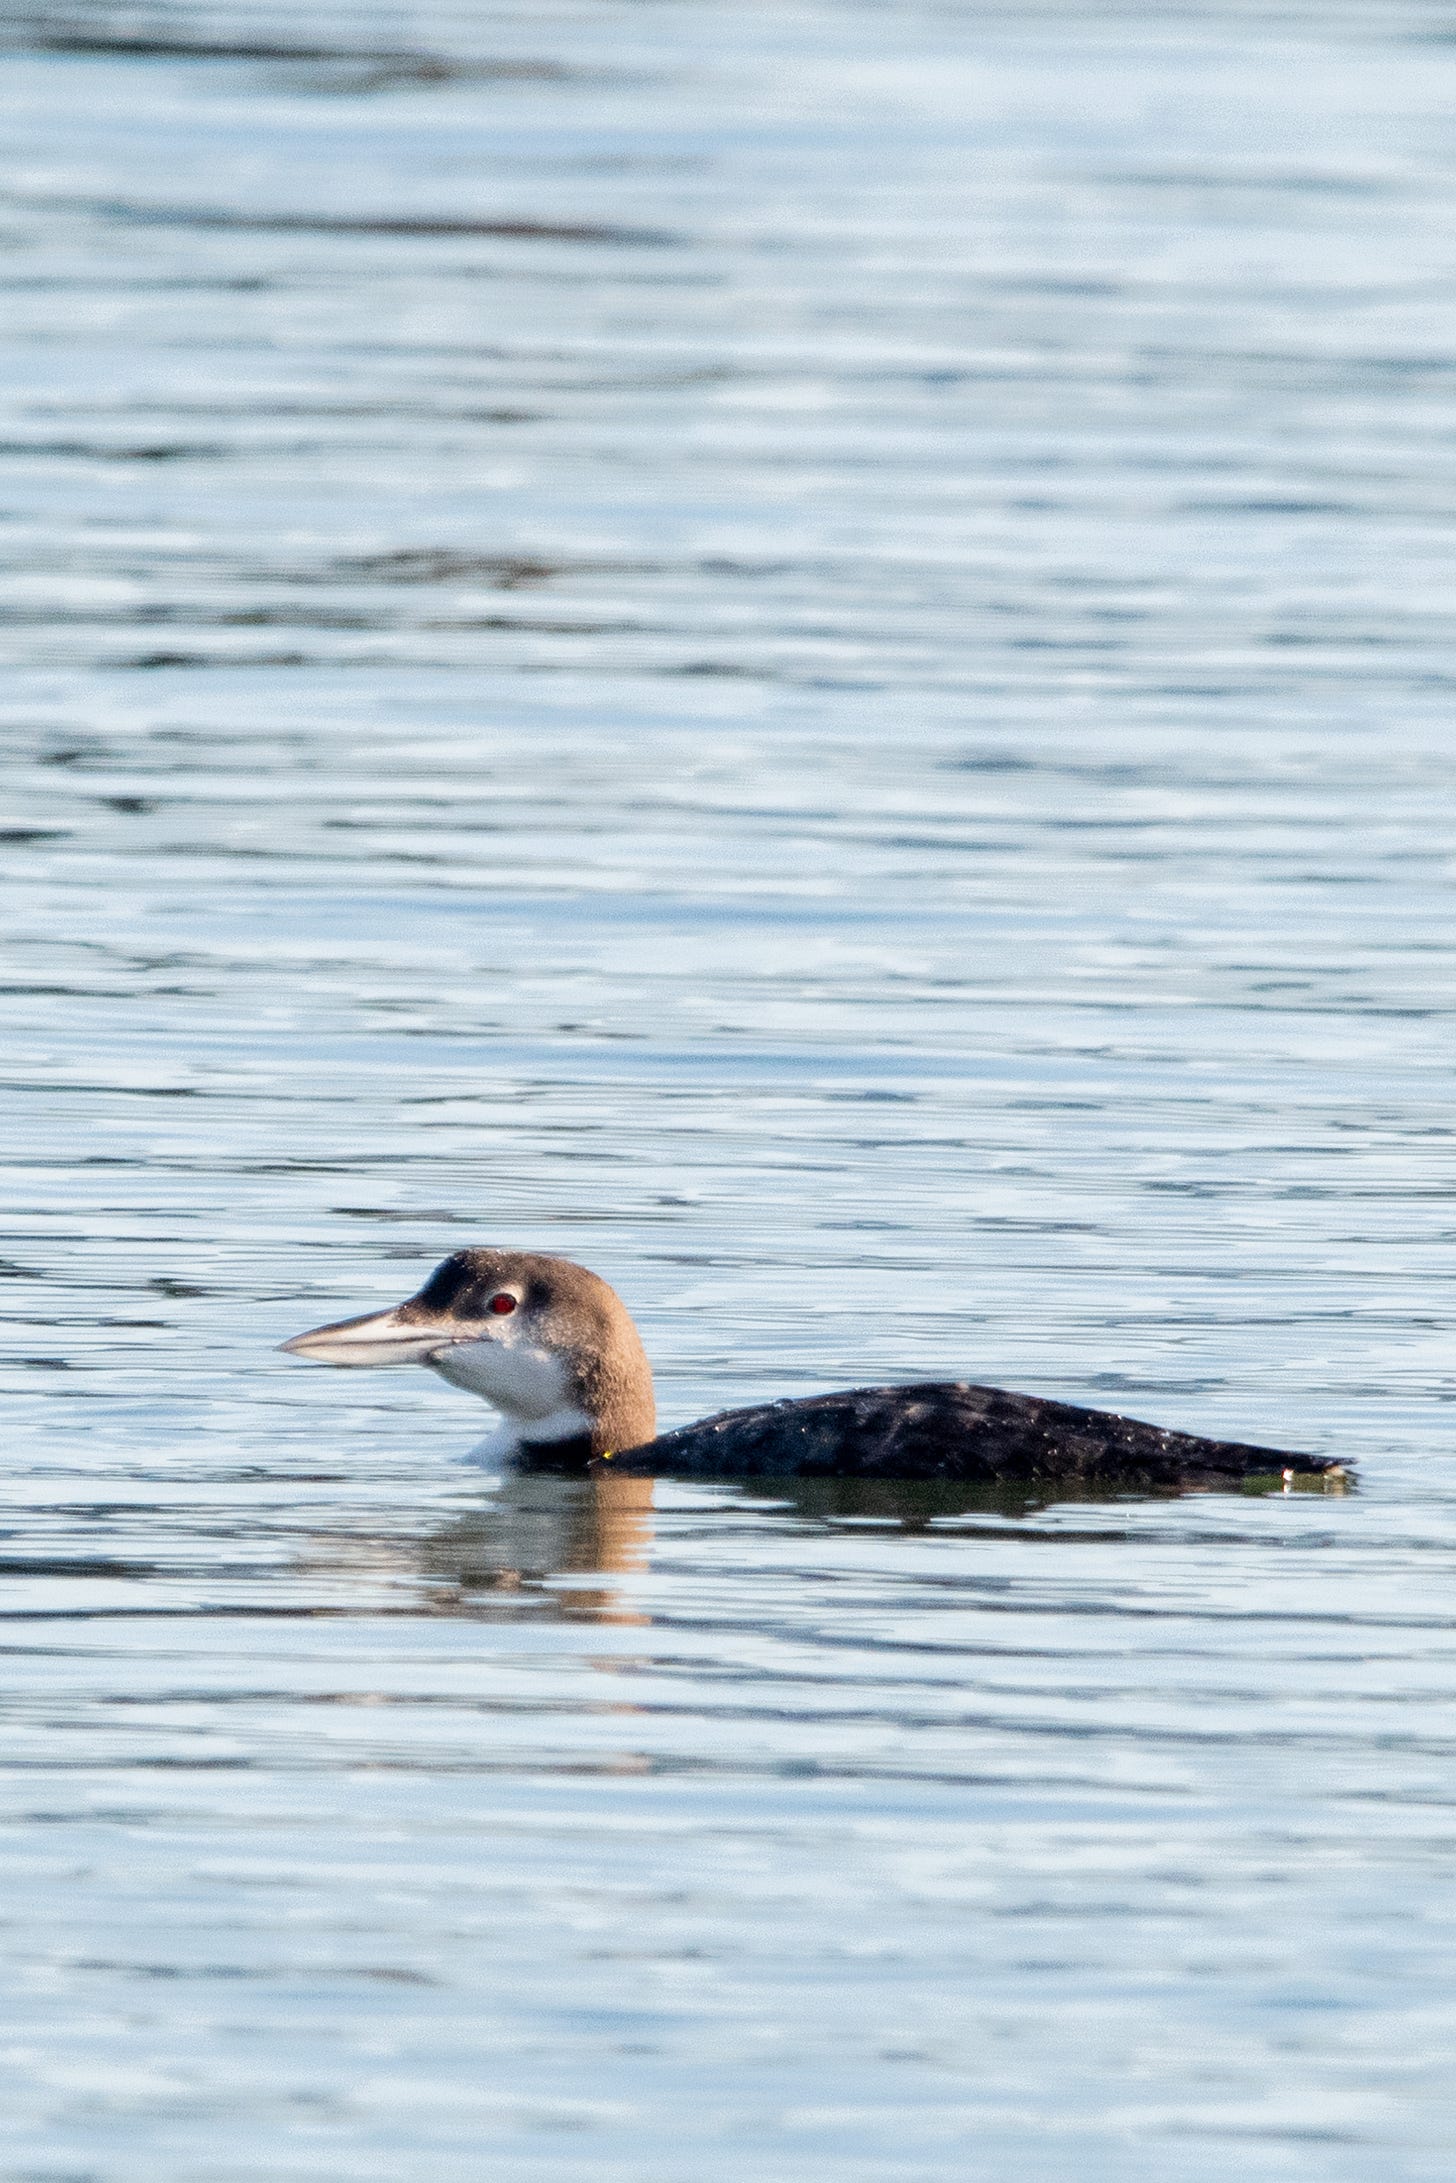 A common loon, with an eye as red and flat as a bicycle reflector, swims in steel-blue water